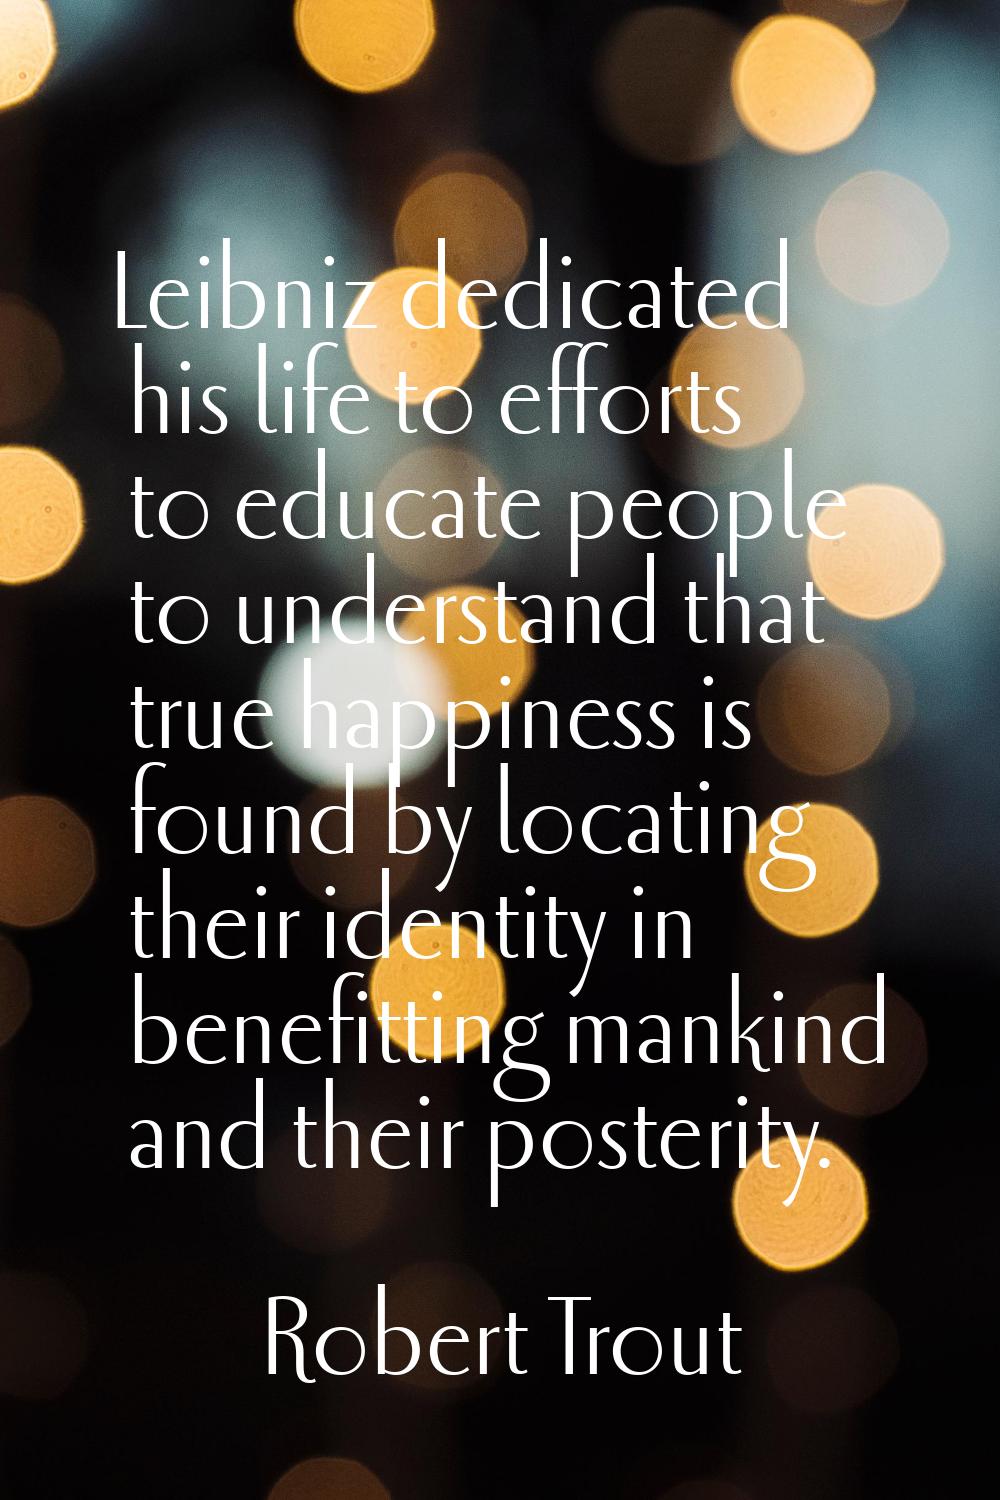 Leibniz dedicated his life to efforts to educate people to understand that true happiness is found 